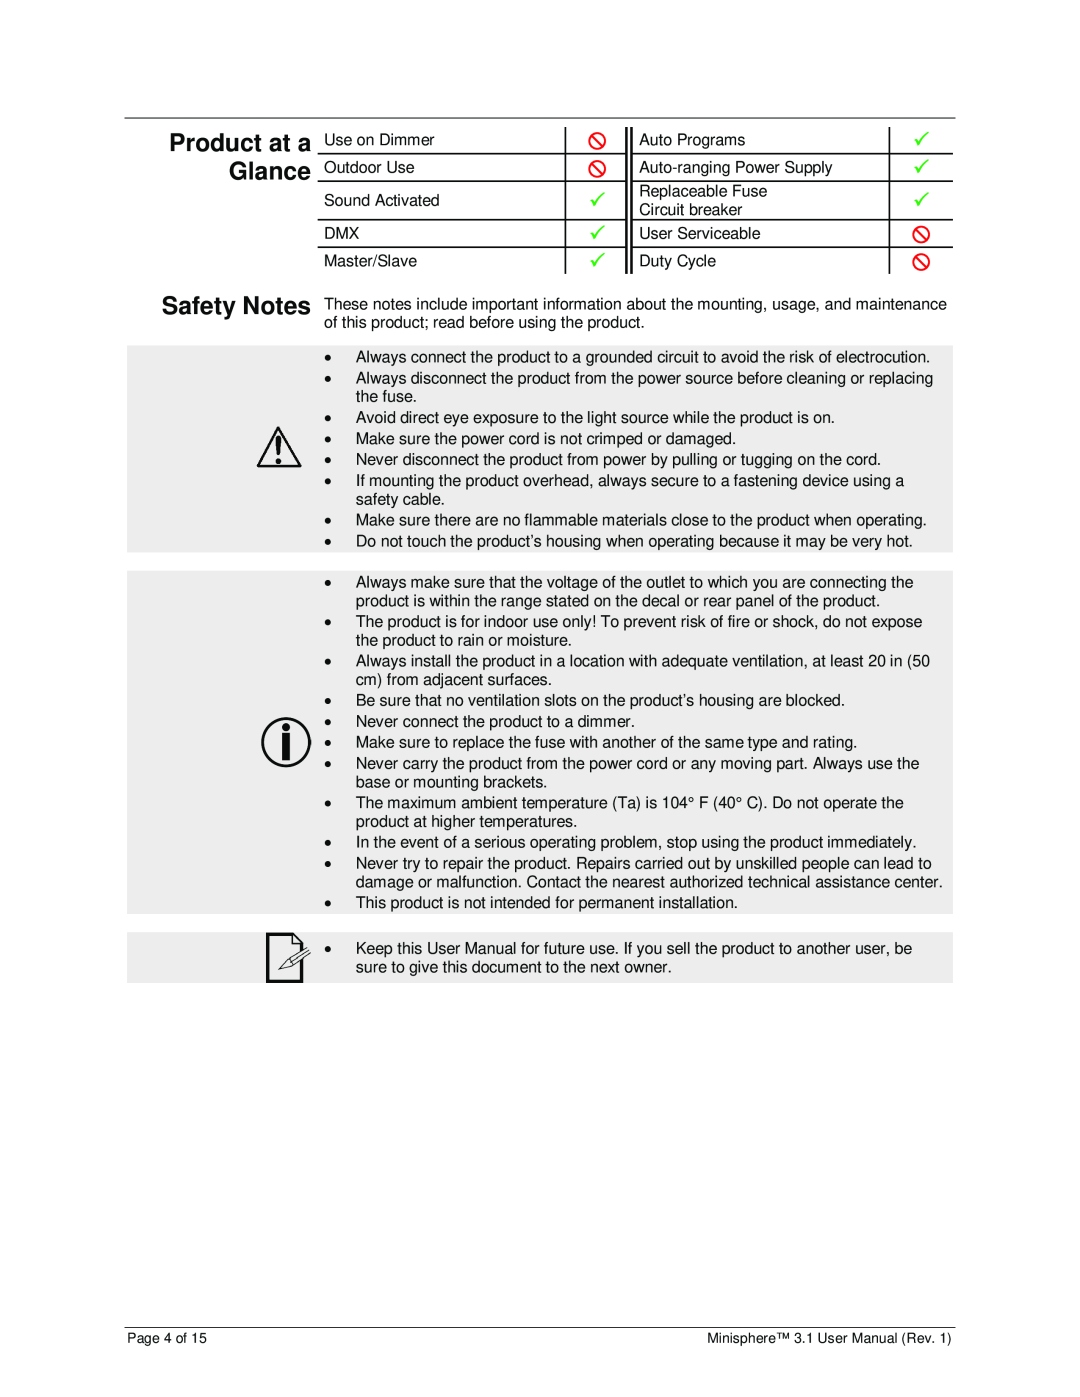 Chauvet 3.1 user manual Product at a Glance, Safety Notes,    